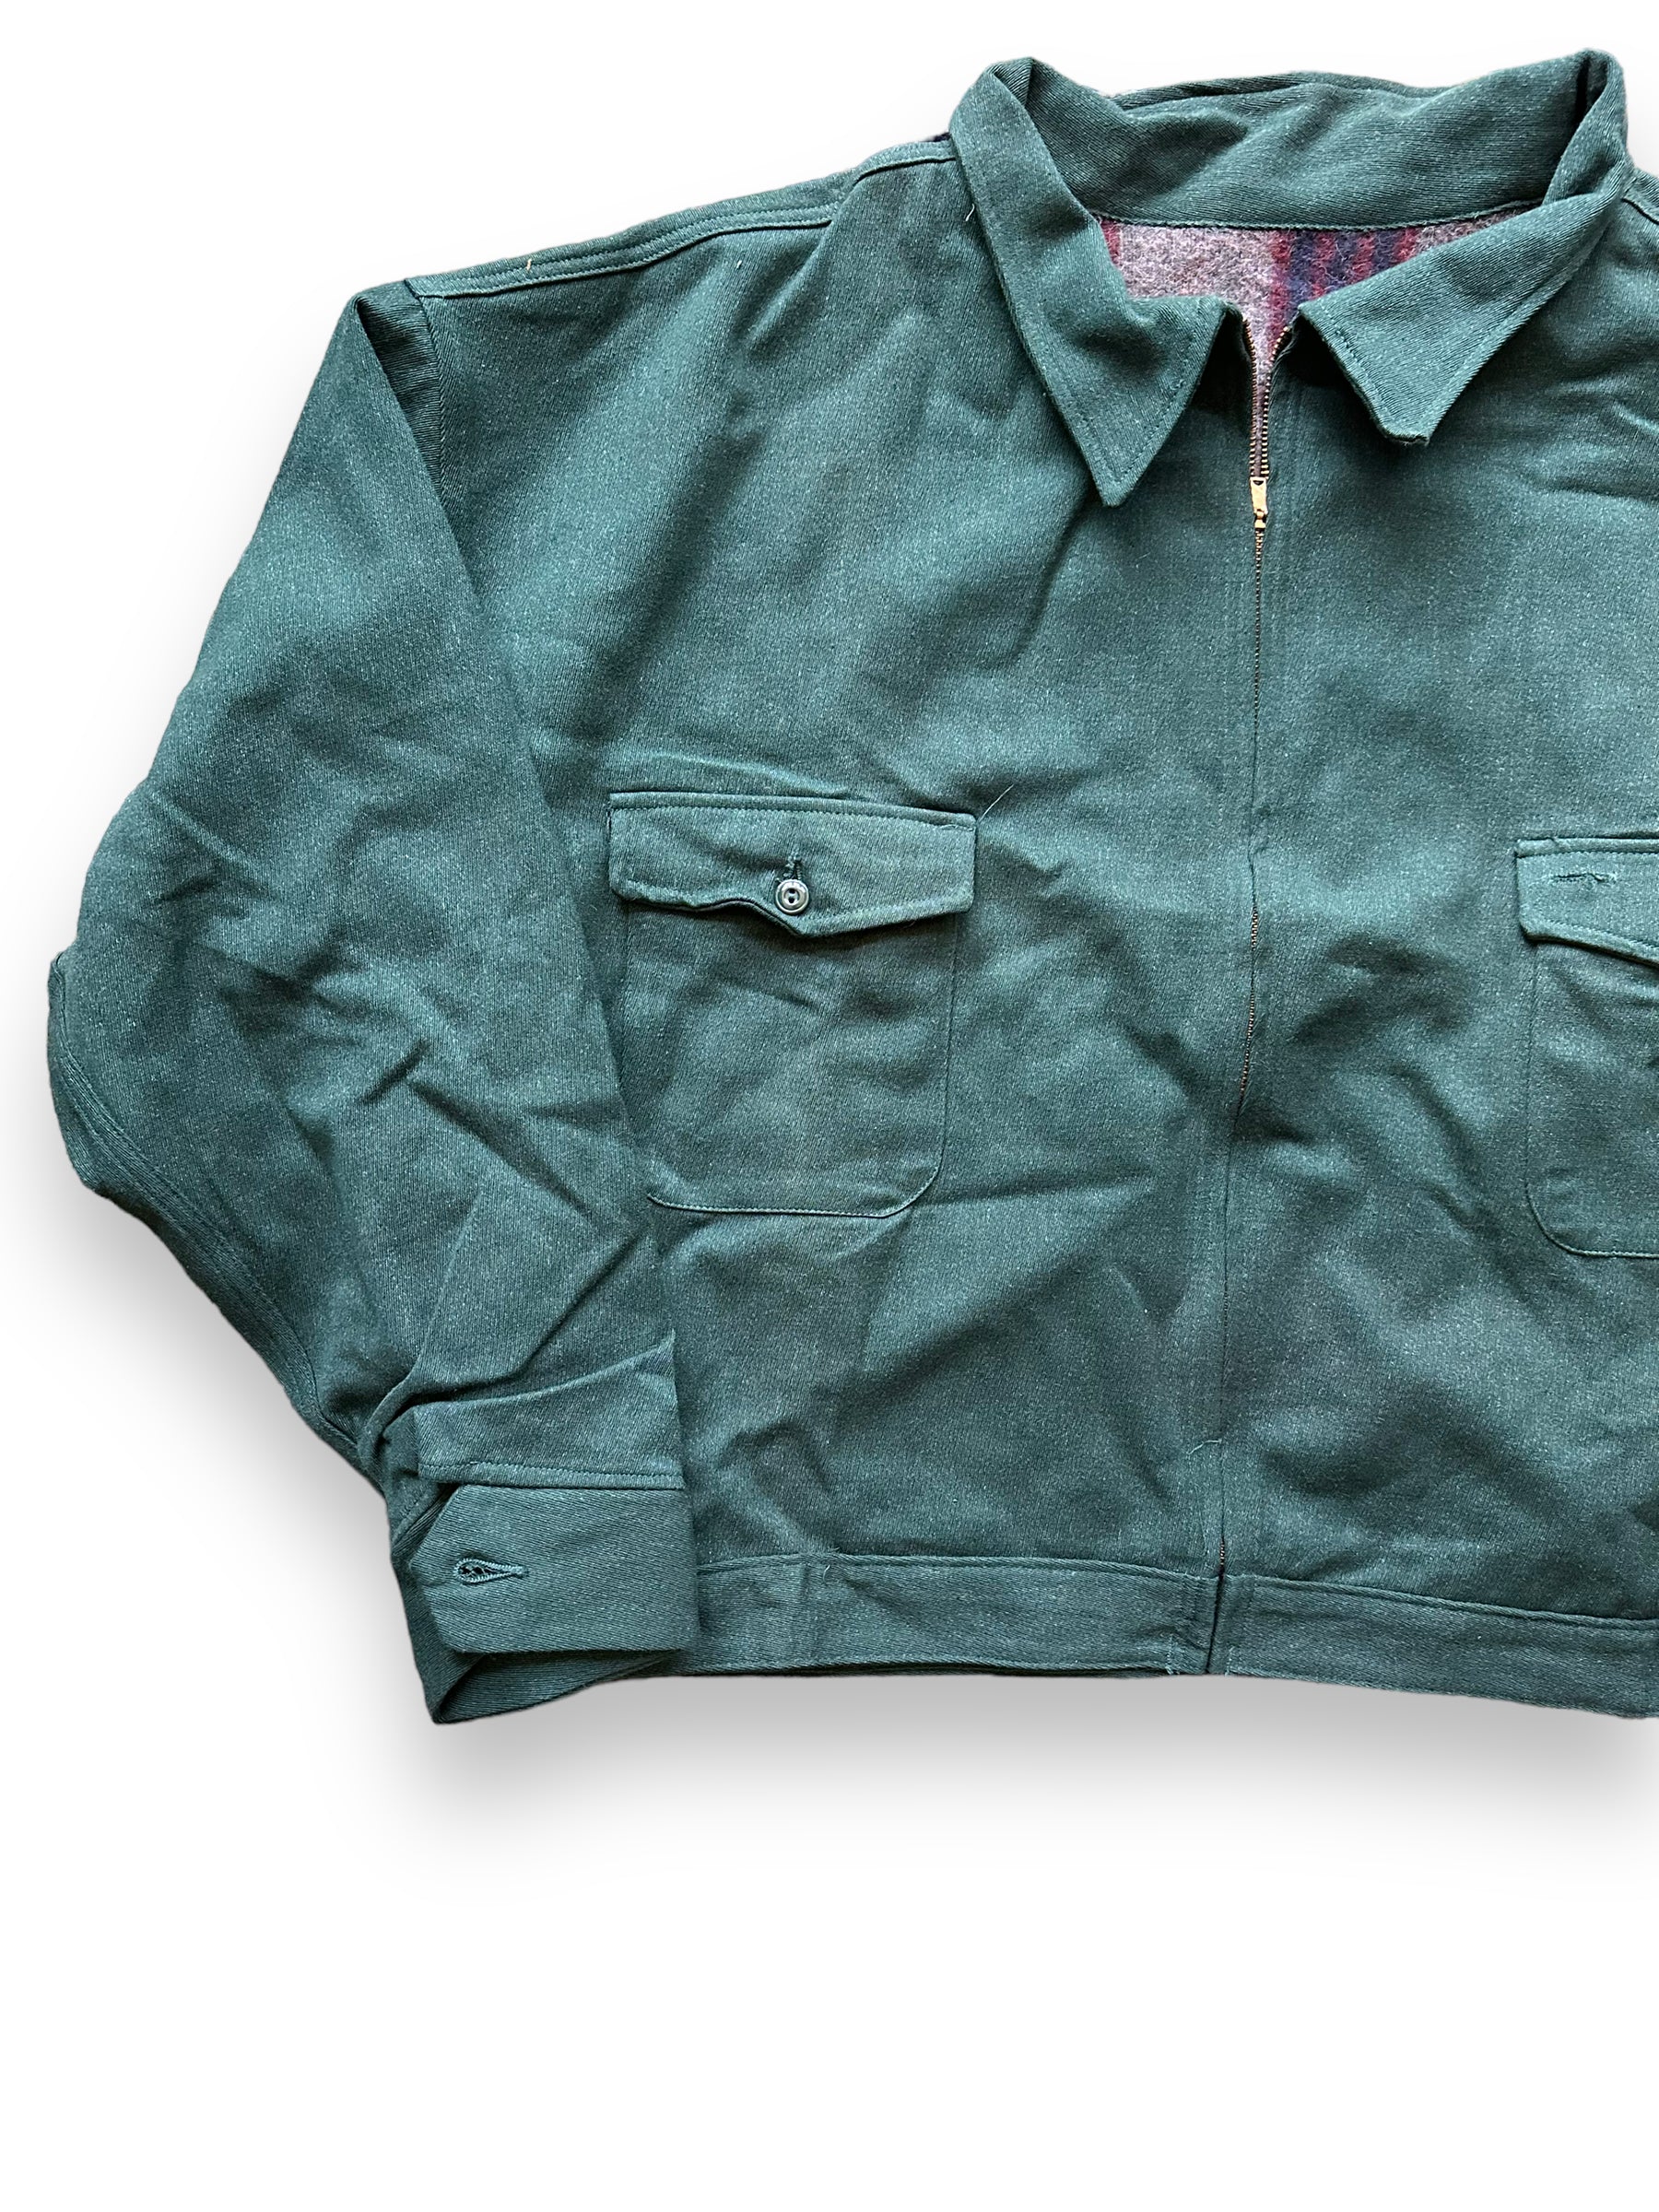 Front Right View of Vintage Green Blanket Lined Gas Station Jacket SZ 56 | Vintage Workwear Jacket Seattle | Seattle Vintage Clothing